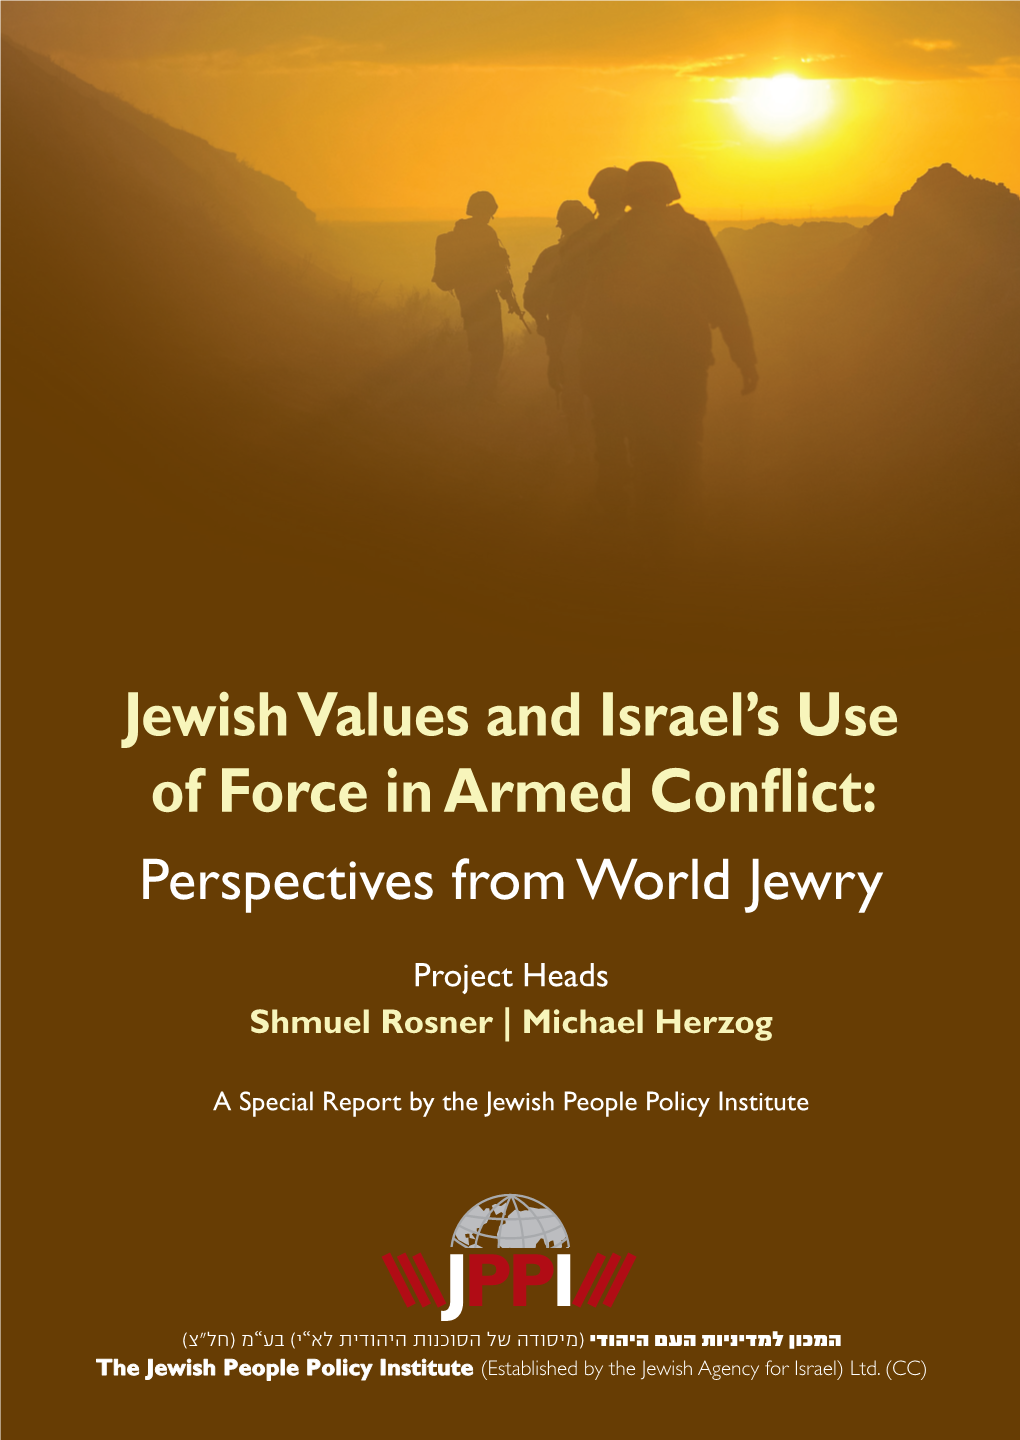 Jewish Values and Israel's Use of Force in Armed Conflict